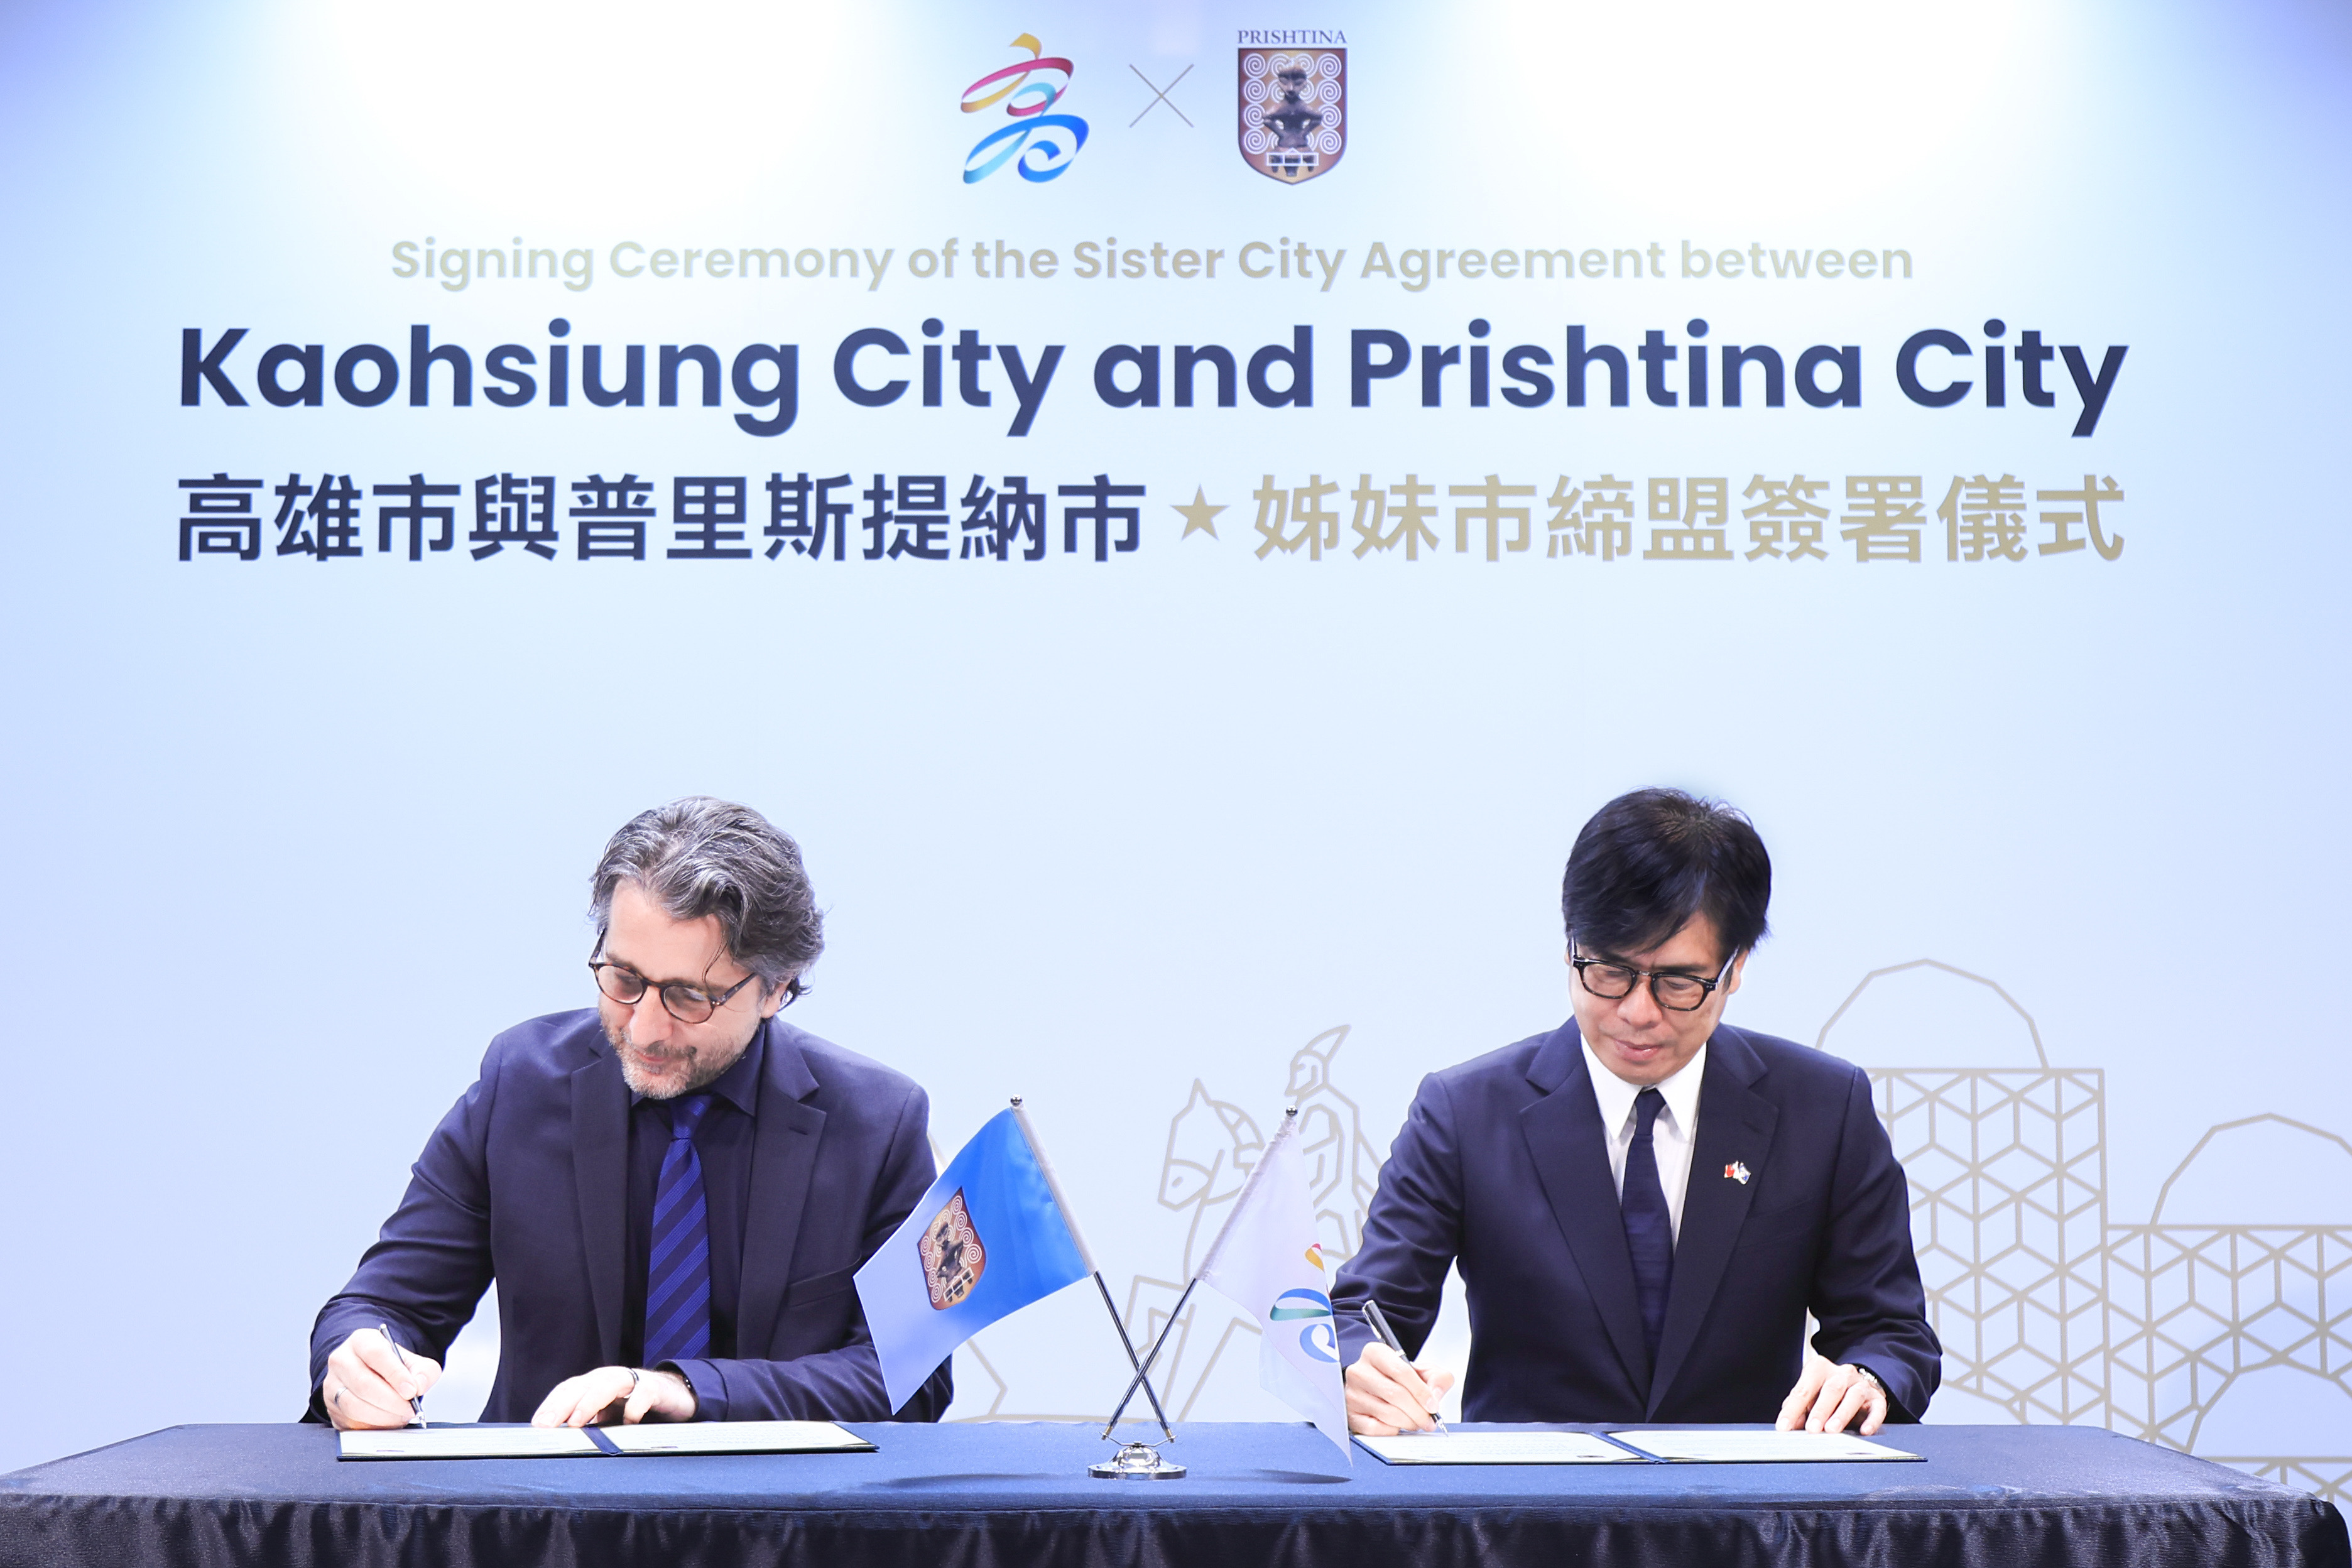 Kaohsiung became the first Asian sister city of Prishtina.